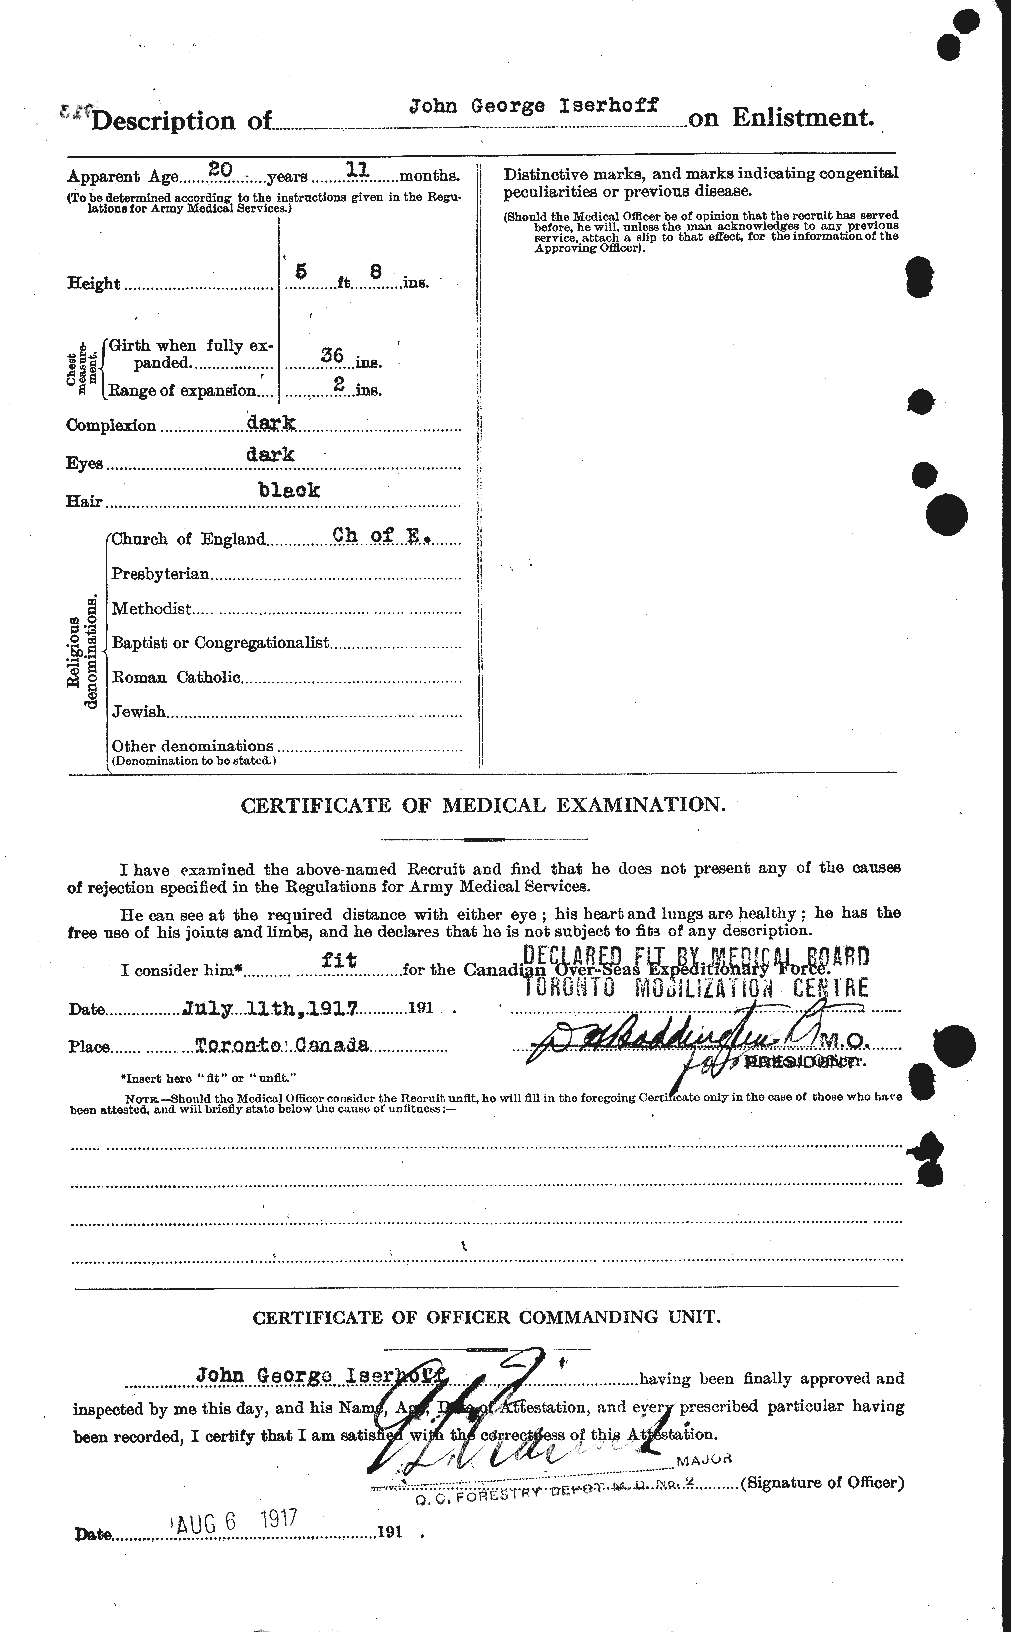 Personnel Records of the First World War - CEF 414008b